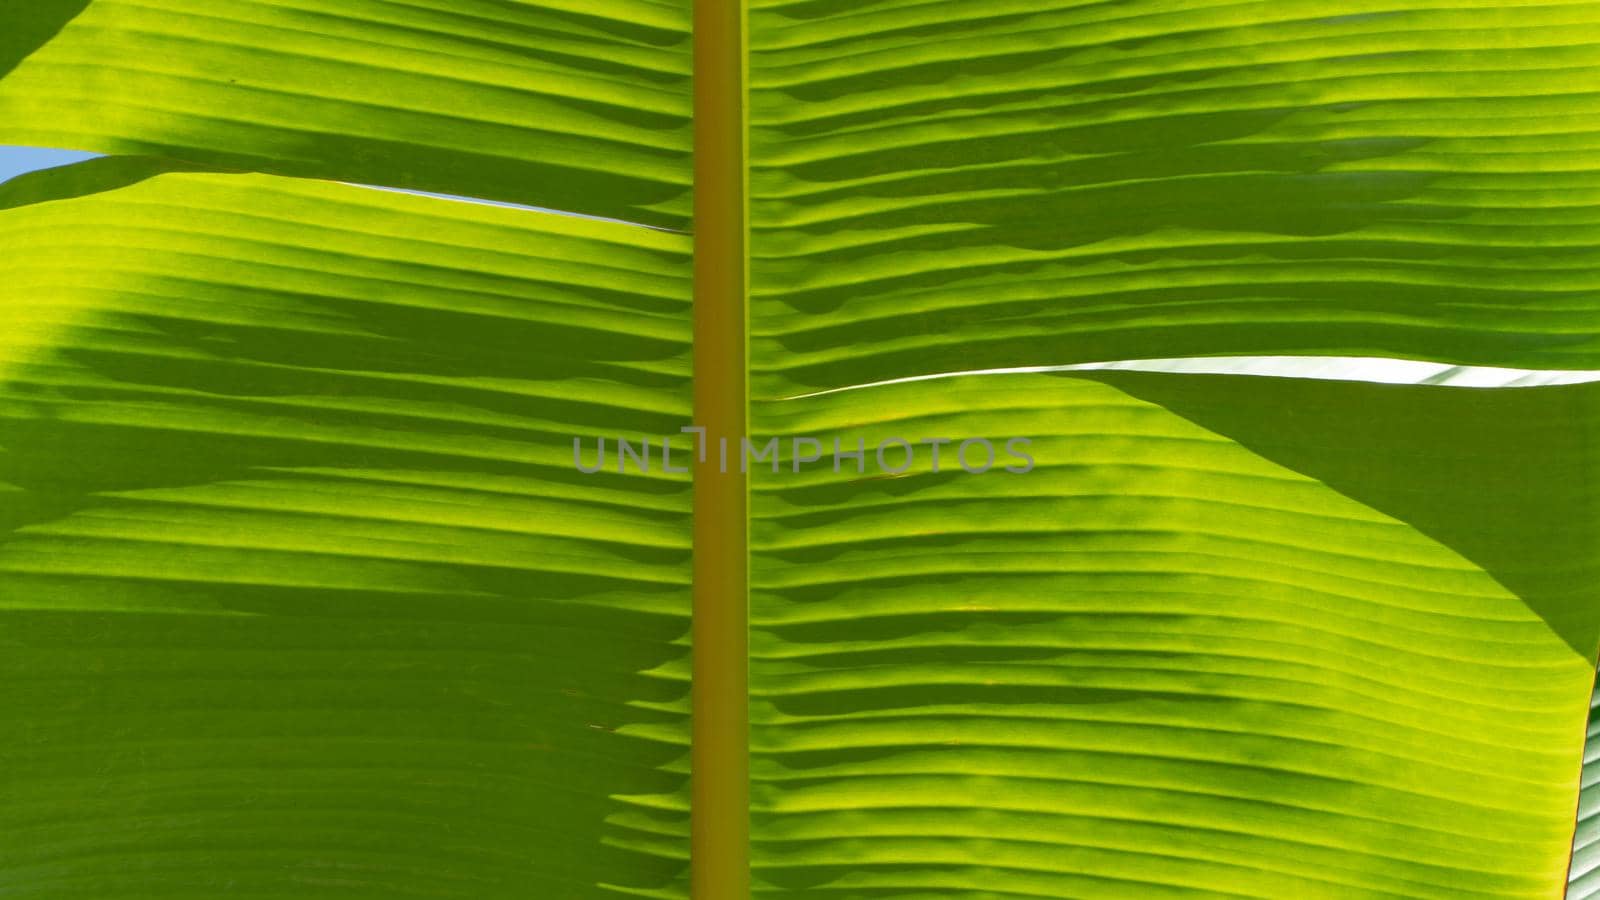 Background and texture of banana tree leaf, green leaf with veins by voktybre